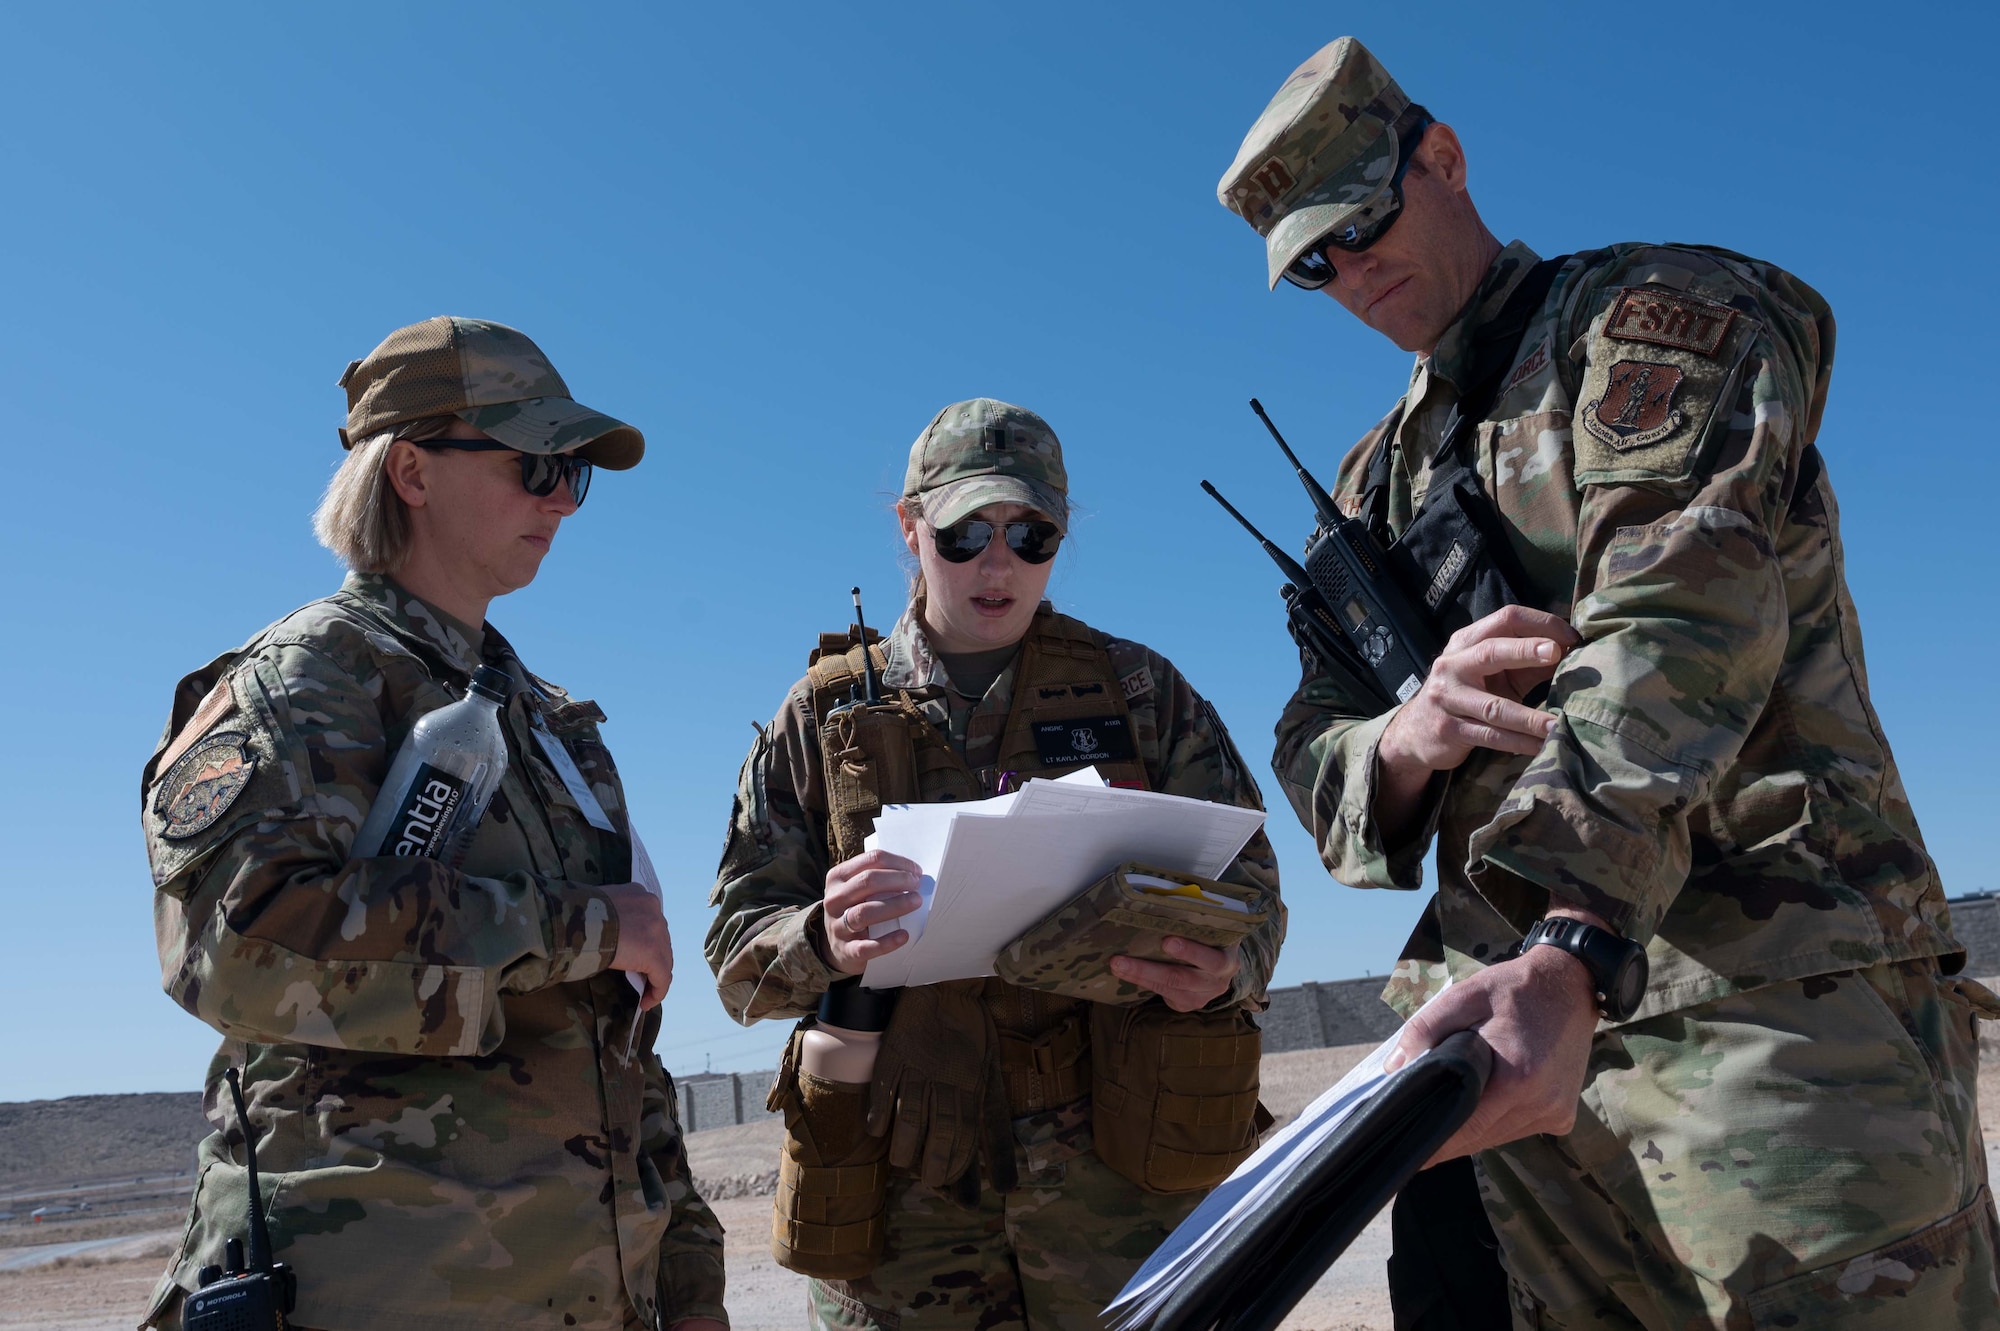 Capt. Jacob Thoman, 162nd FSS FSRT Officer in Charge (OIC), answers questions from Observation Control Team members during an in-person combined training event with other Air and Army National Guard units this week in Las Vegas. As the OIC, Capt. Thoman oversees the Tucson FSRT.